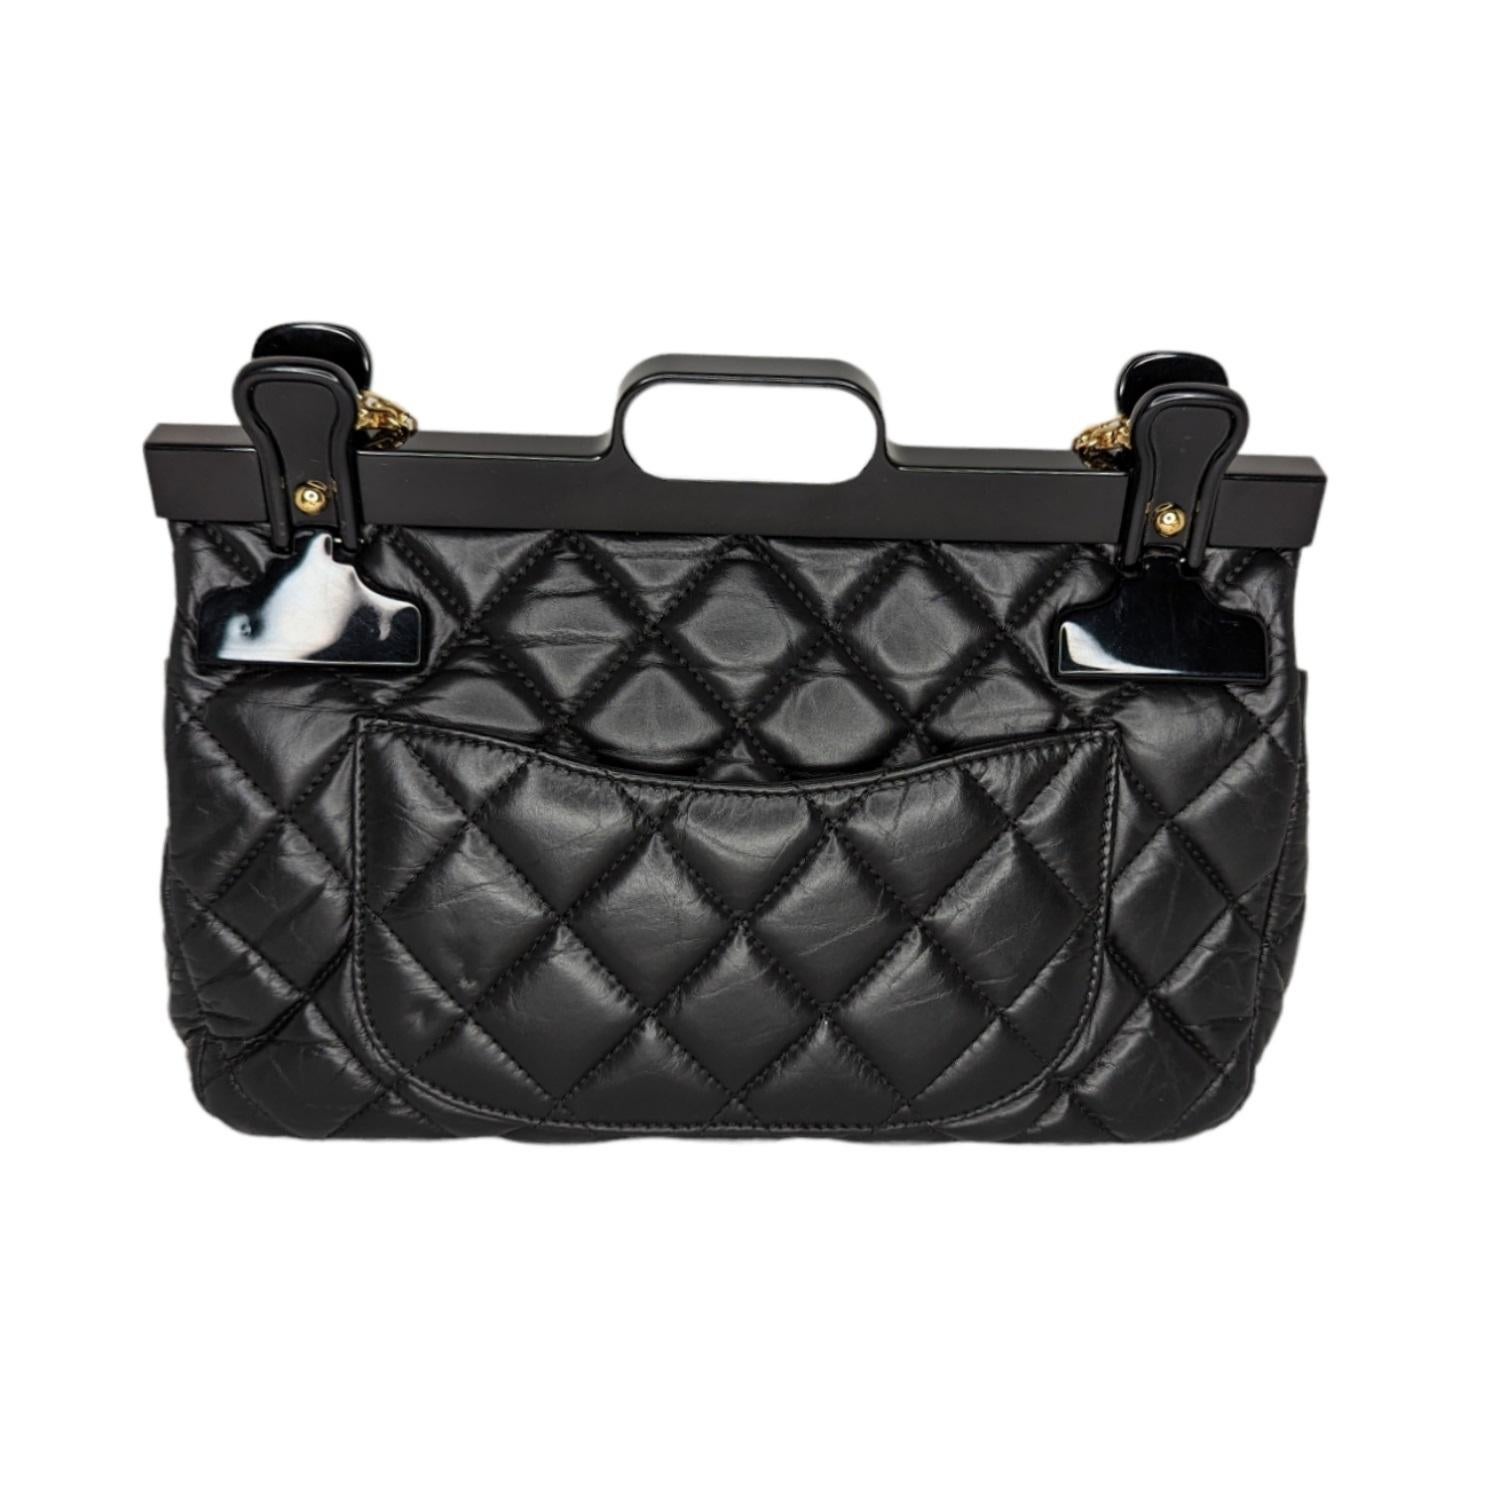 Black diamond-quilted aged calfskin Chanel 2.55 Reissue 225 Hanger Flap bag with gold-tone hardware, single chain-link shoulder strap, single patch pocket at back, acrylic hanger accent with interlocking CC adornment at top, burgundy leather lining,